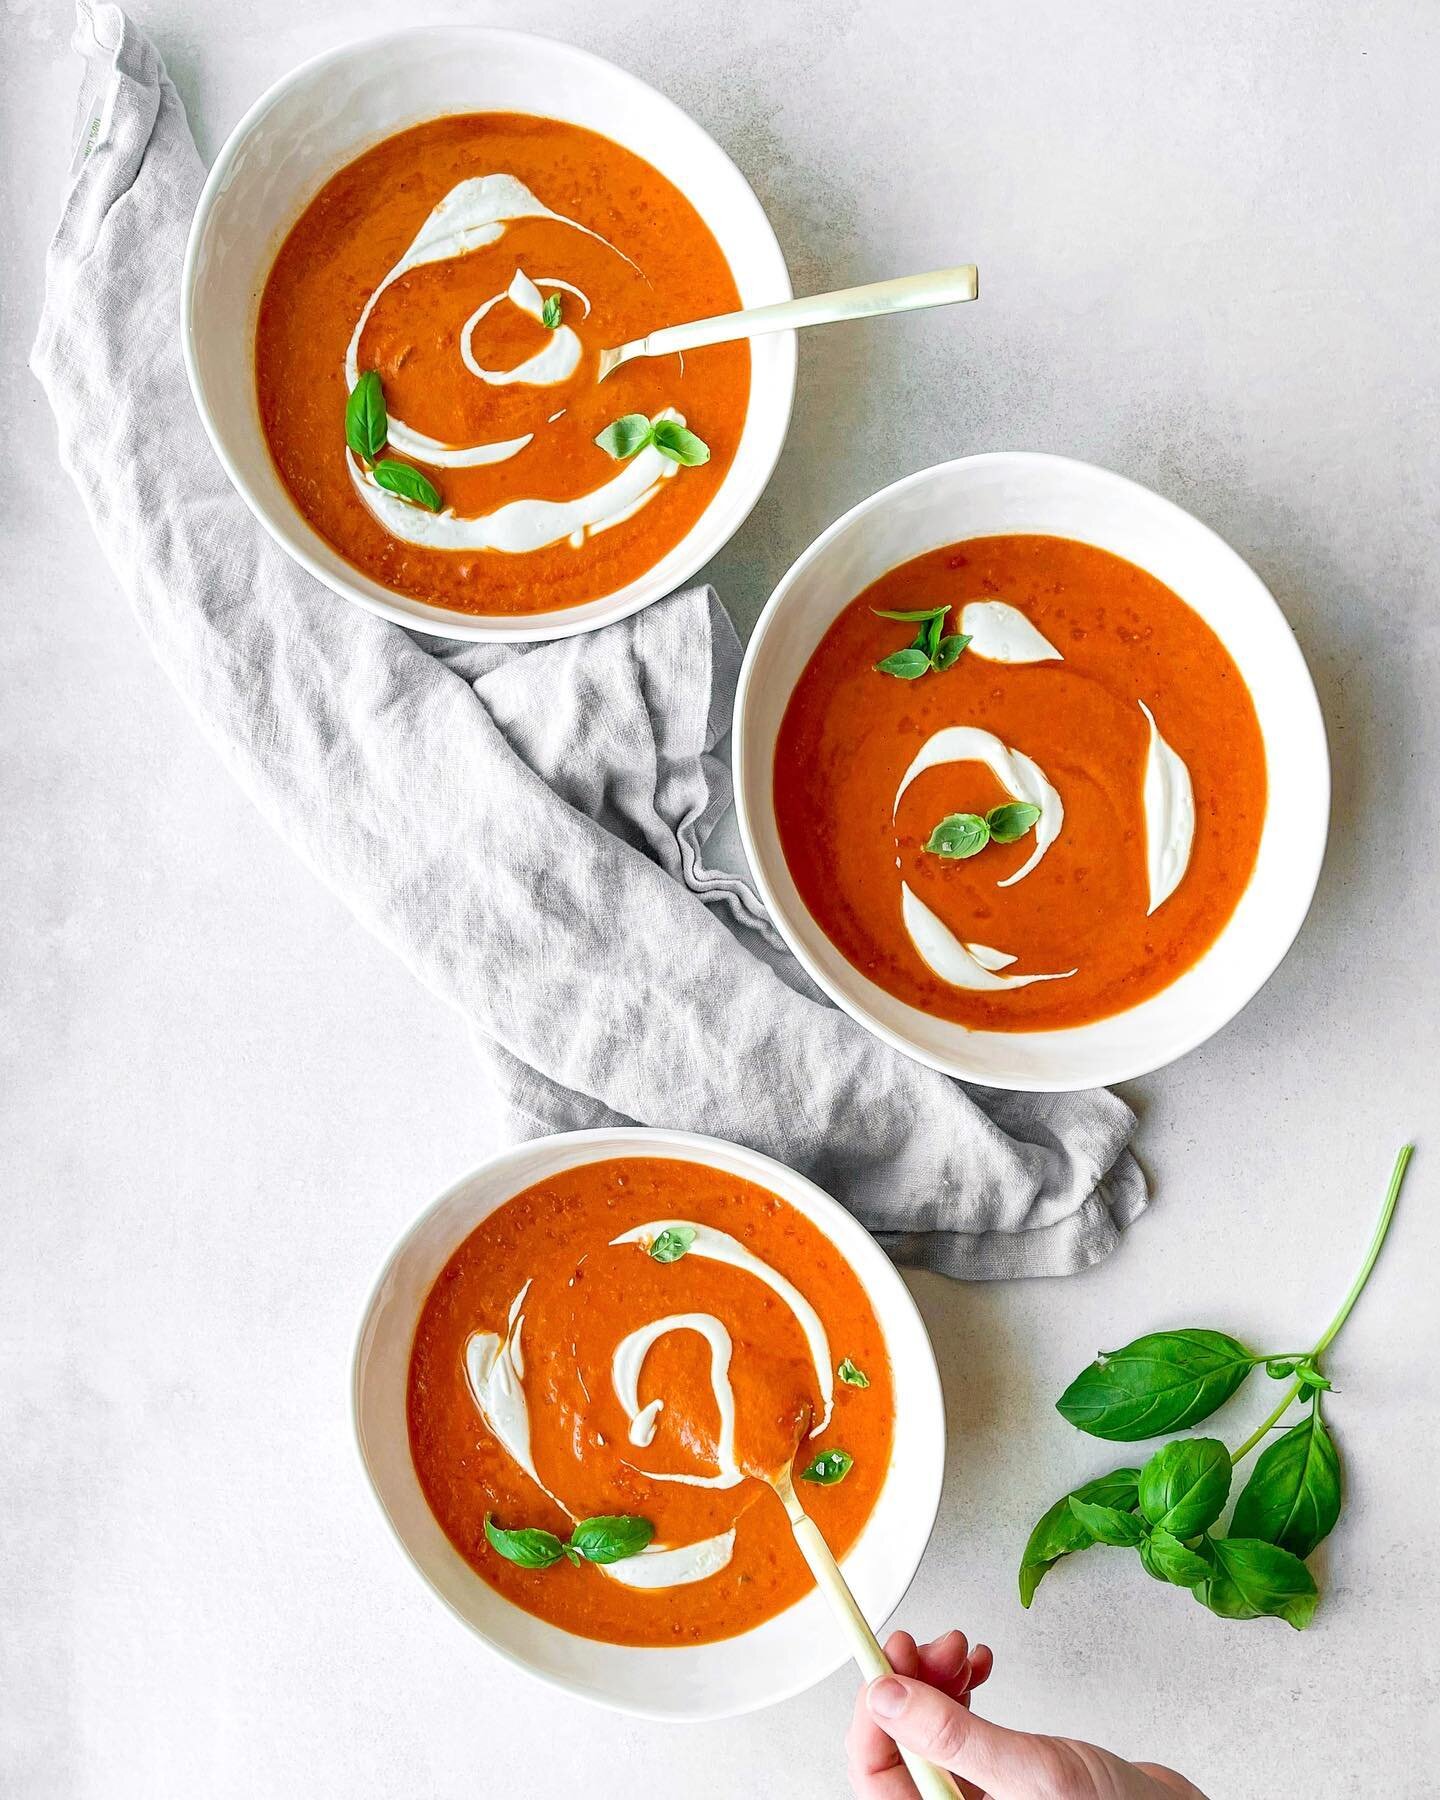 Working on revamping a few of my old recipes! You&rsquo;ll find this delicious Roasted Tomato Basil Soup with Cashew Sour Cream on my site today! Happy Friday!